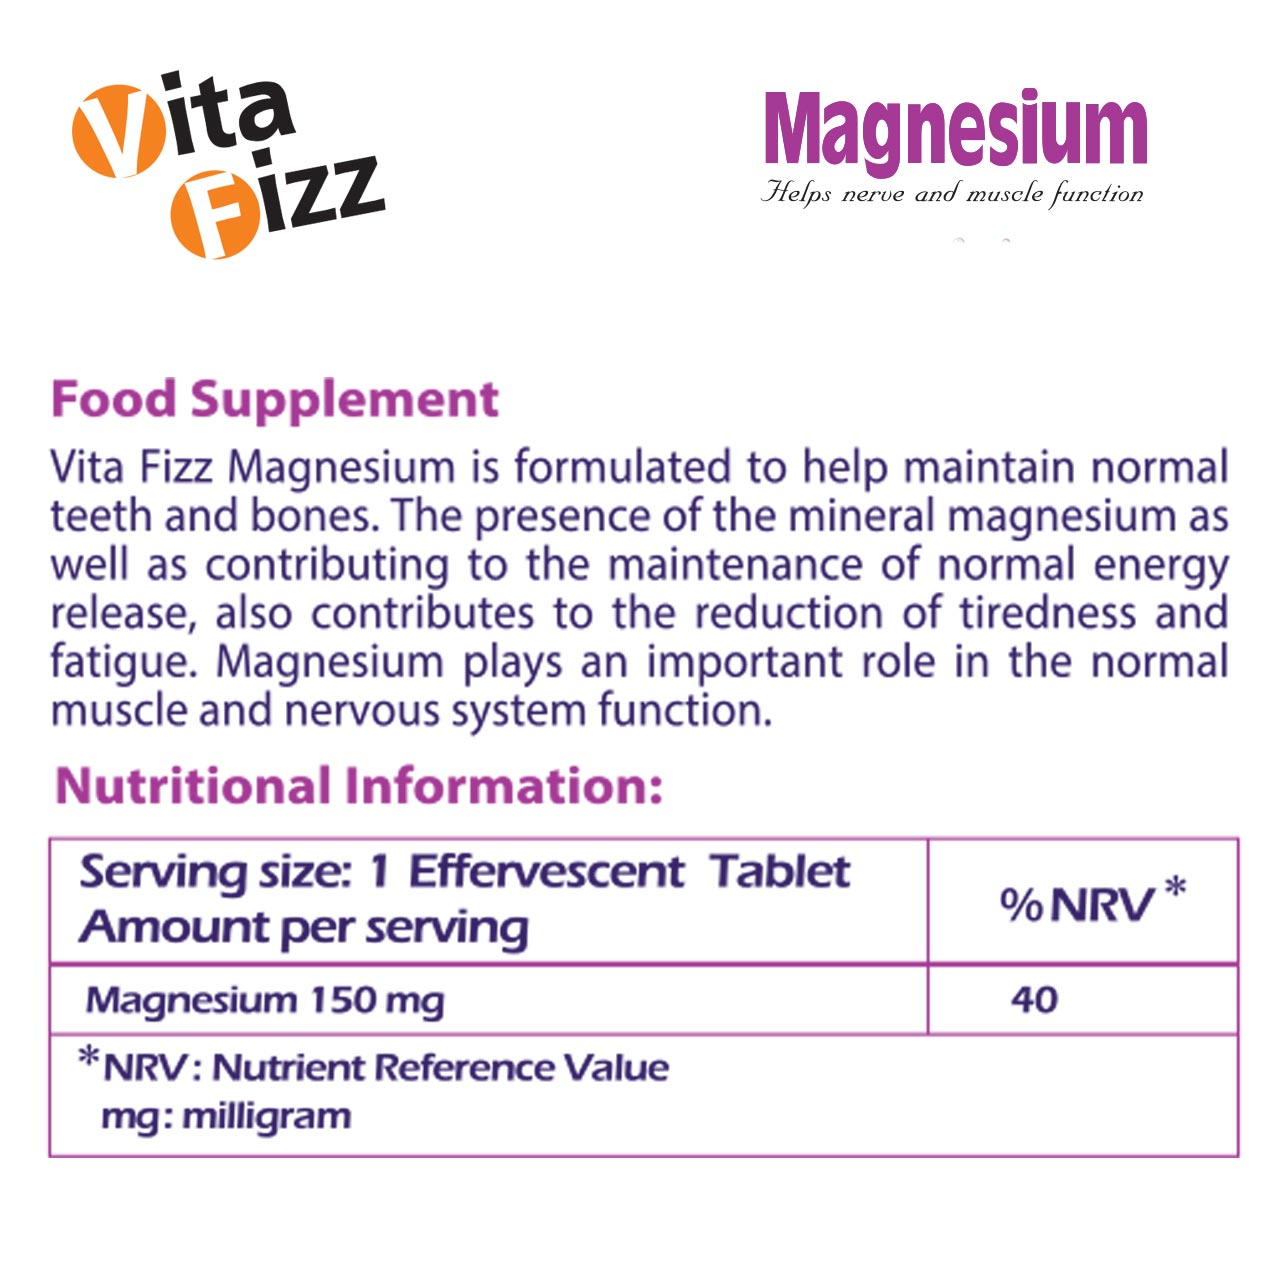 Magnesium 150mg facts